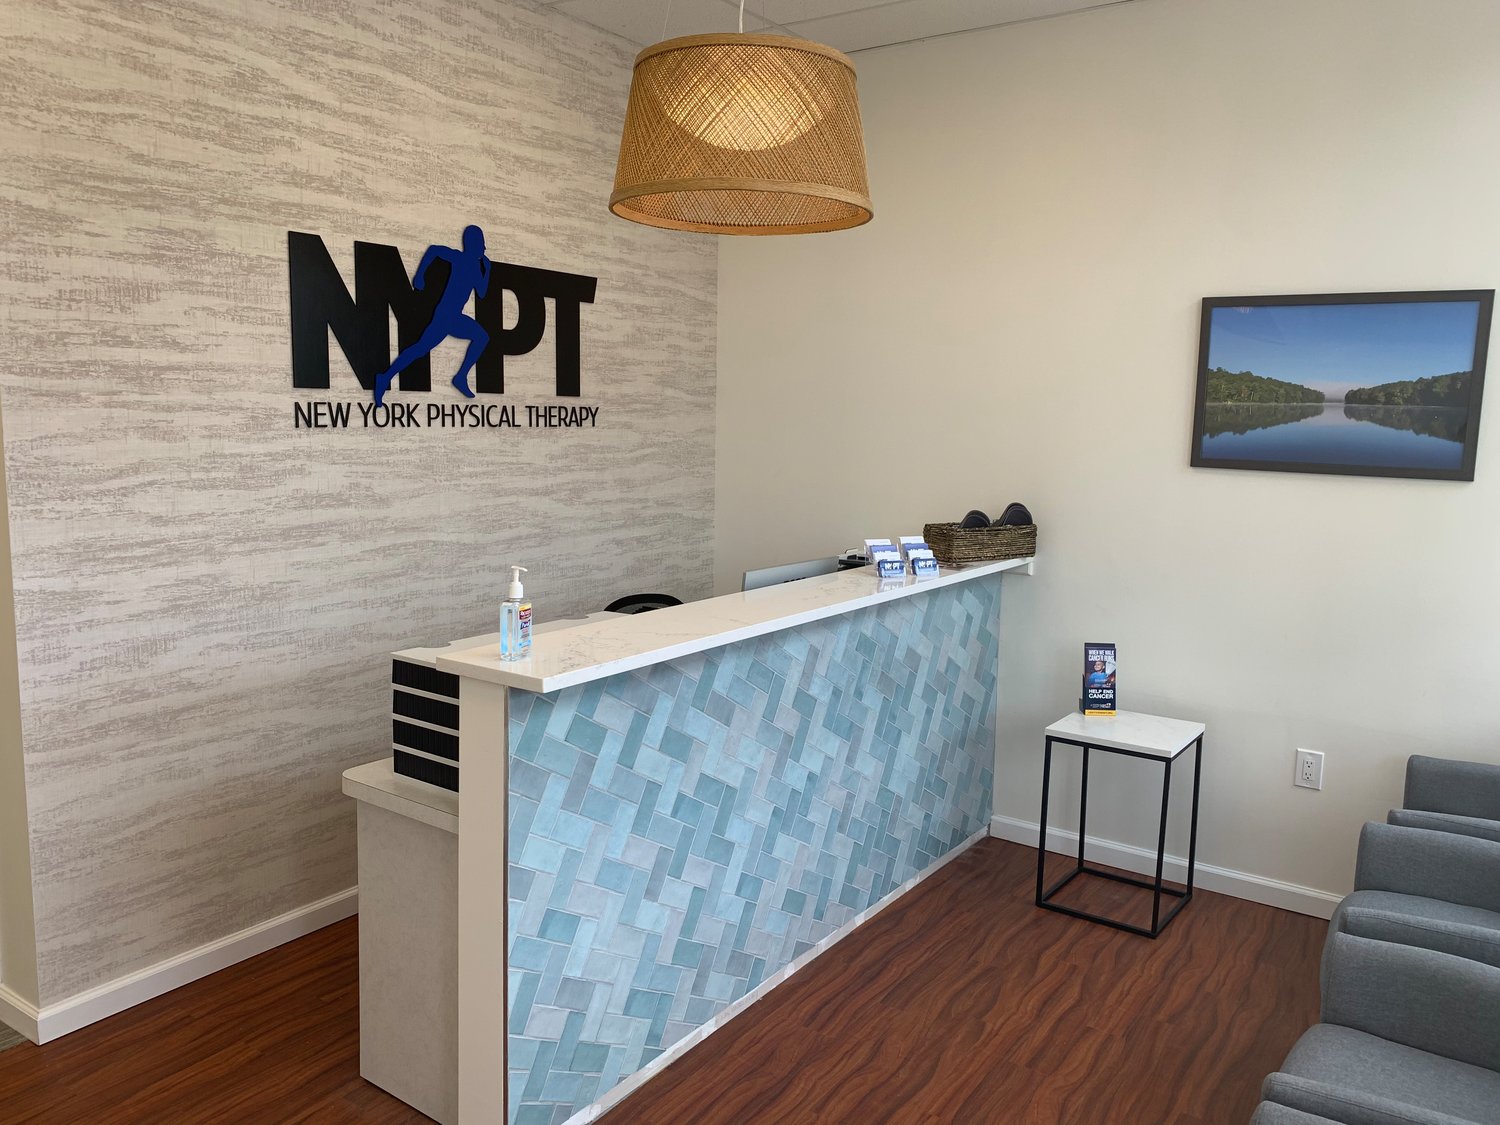 New York Physical Therapy in Valley Stream has remained open as an essential business during the pandemic and offers telehealth remote appointment options.